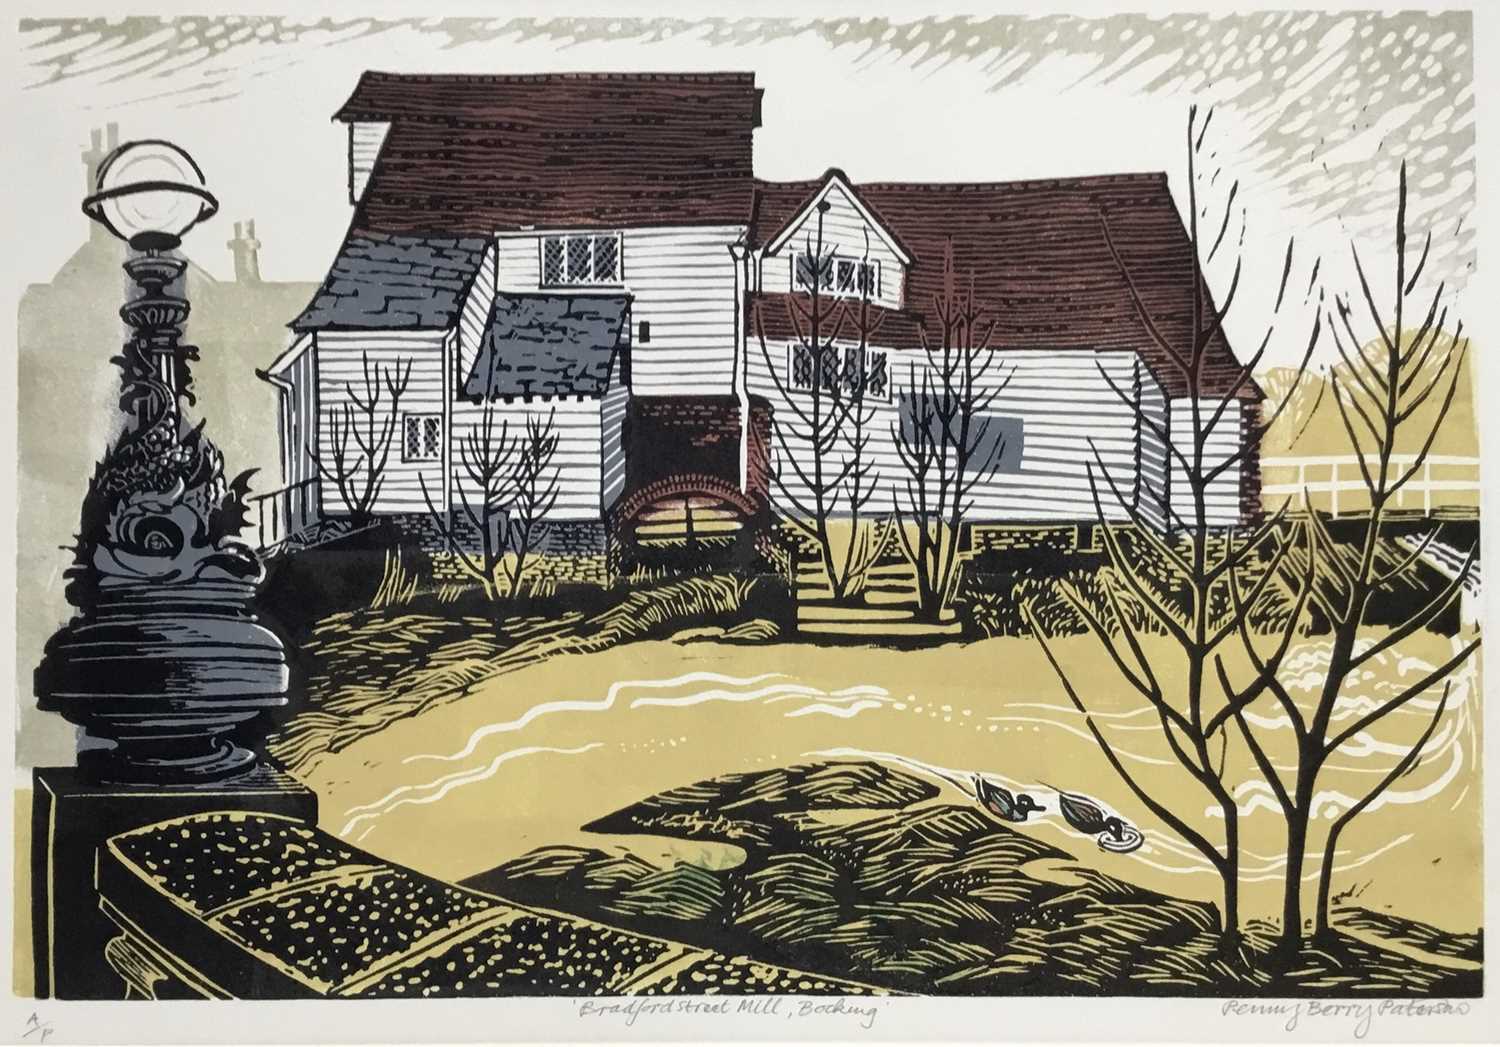 Lot 161 - Penny Berry Paterson (1941-2021) linocut print, Bradford Street Mill, Bocking, signed and numbered A/P, 30 x 42cm, with mount